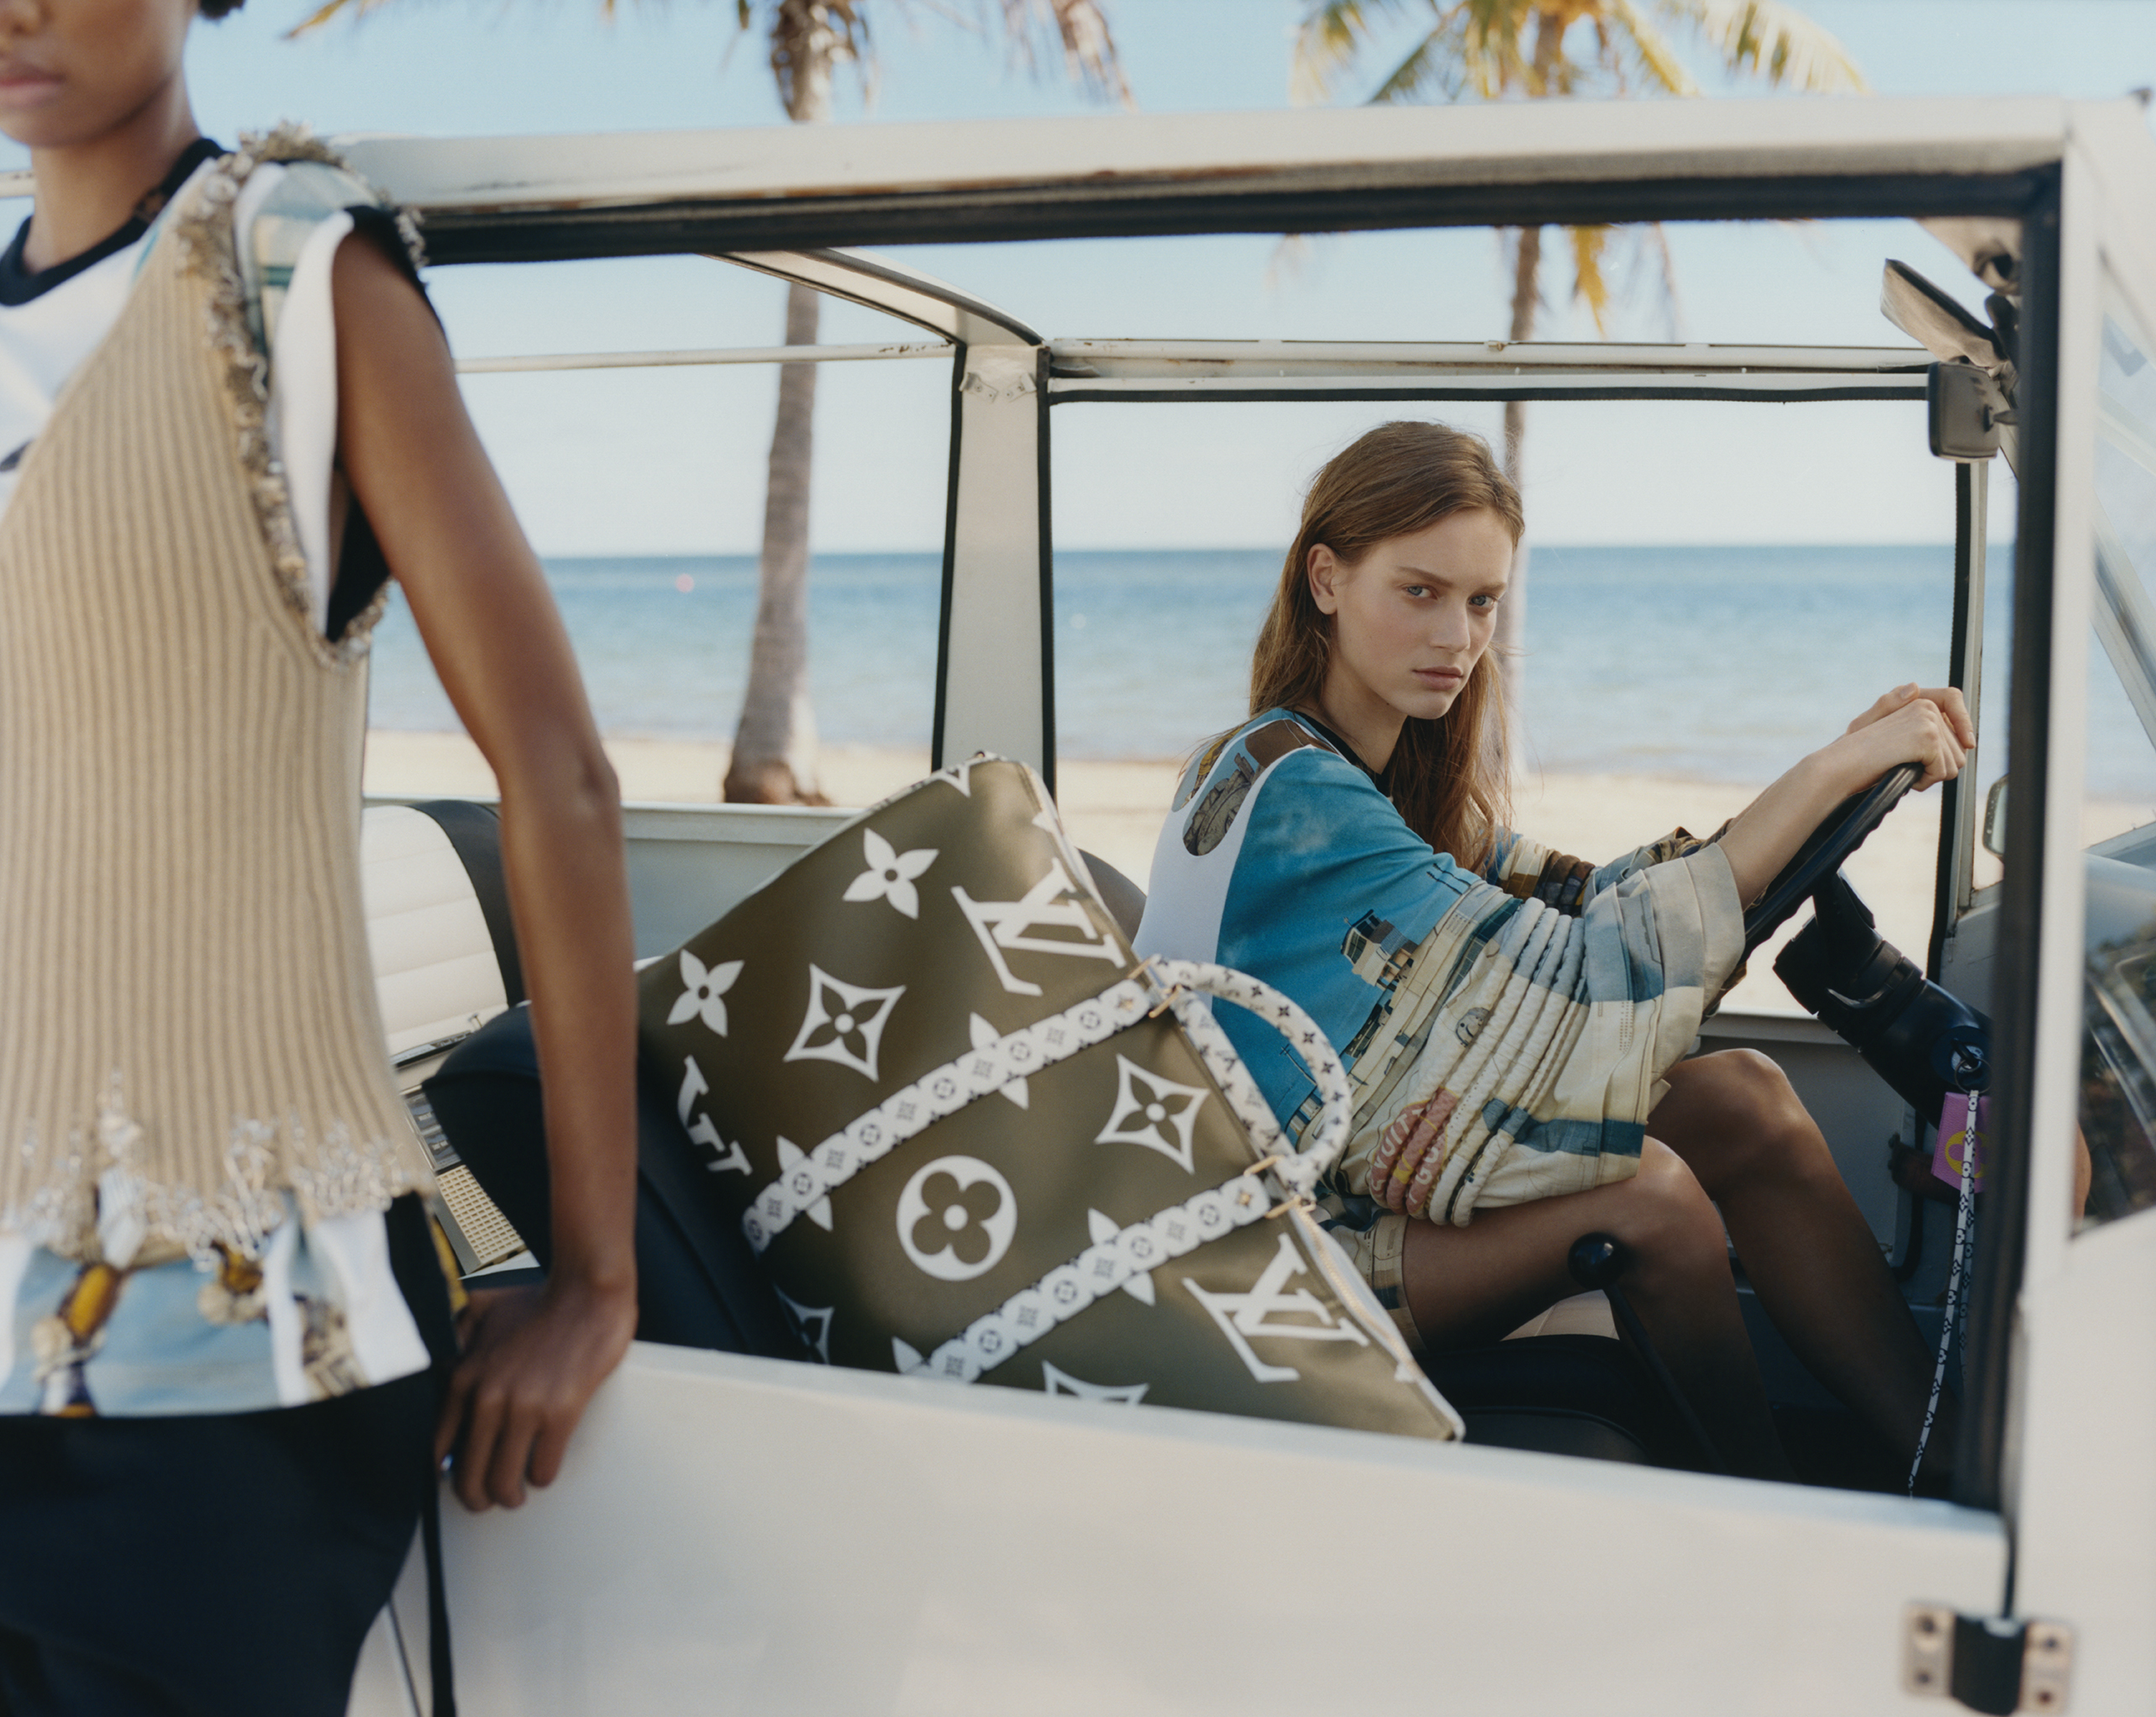 Hold on to summer with Louis Vuitton's exquisite new capsule